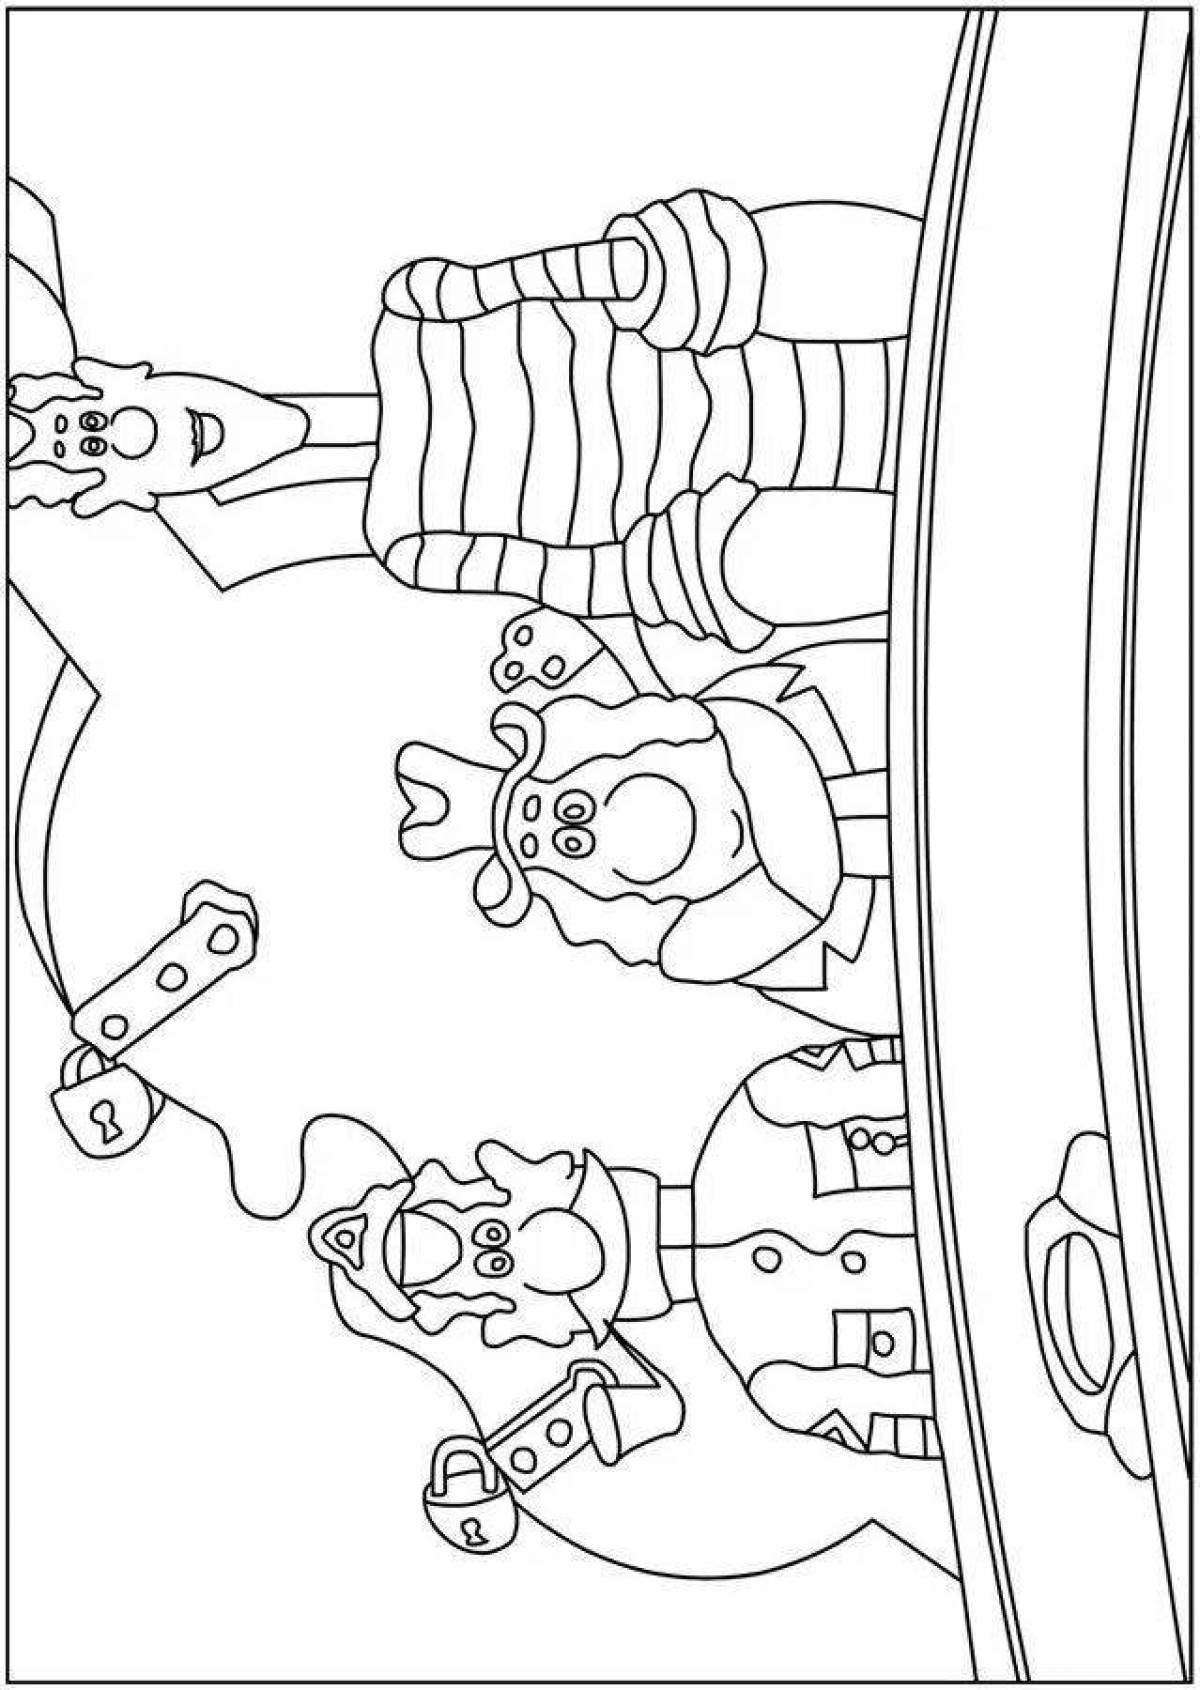 Captain vrungel coloring page filled with colors